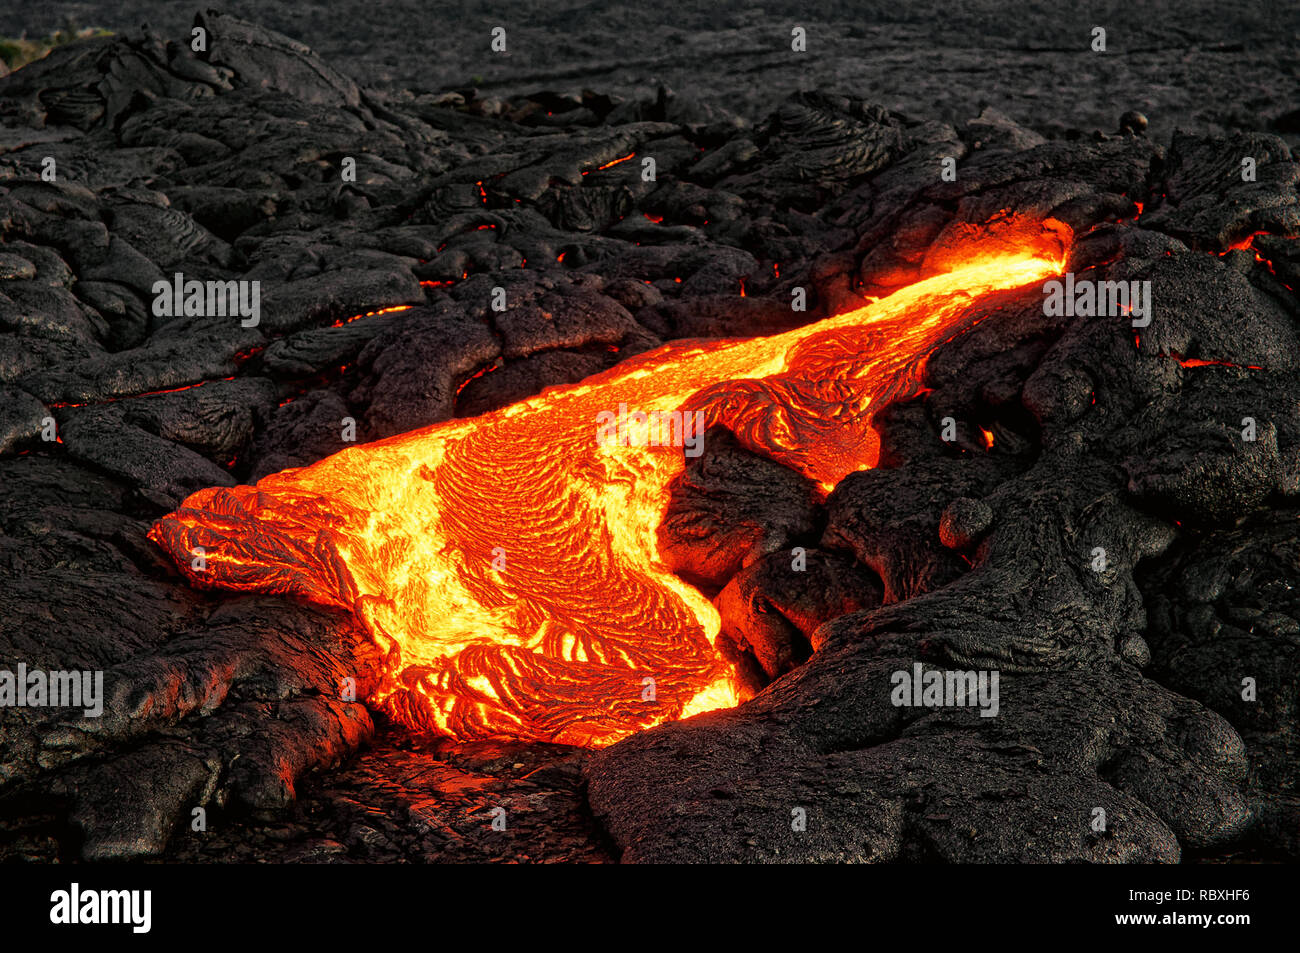 Hot magma escapes from an earth crevice as part of an active lava flow, the glowing lava slowly cools and freezes - Location: Hawaii, Big Island, volc Stock Photo